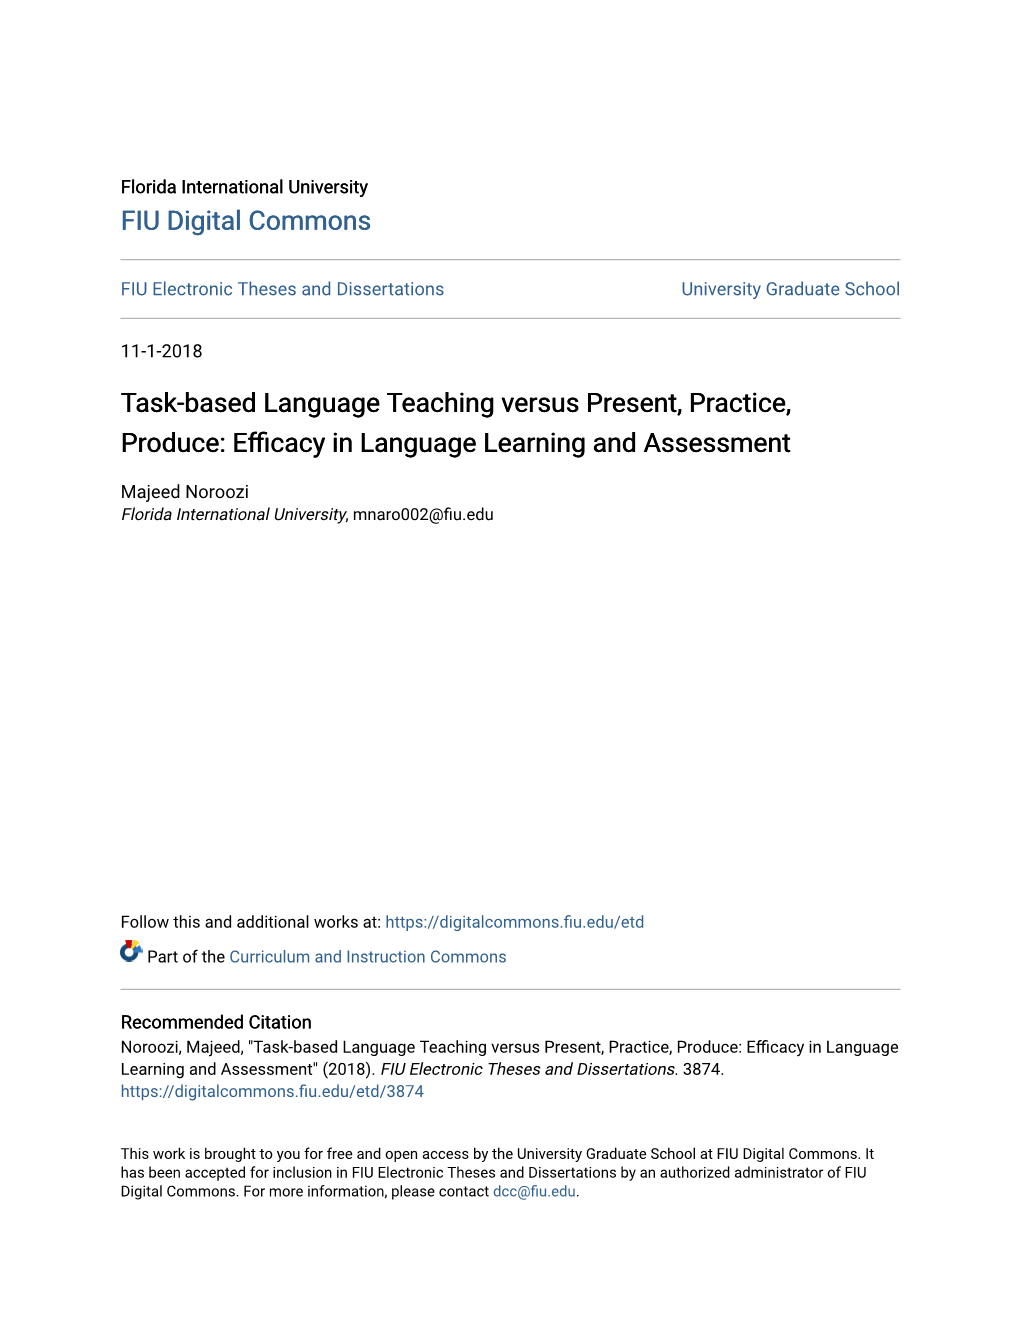 Task-Based Language Teaching Versus Present, Practice, Produce: Efficacy in Language Learning and Assessment